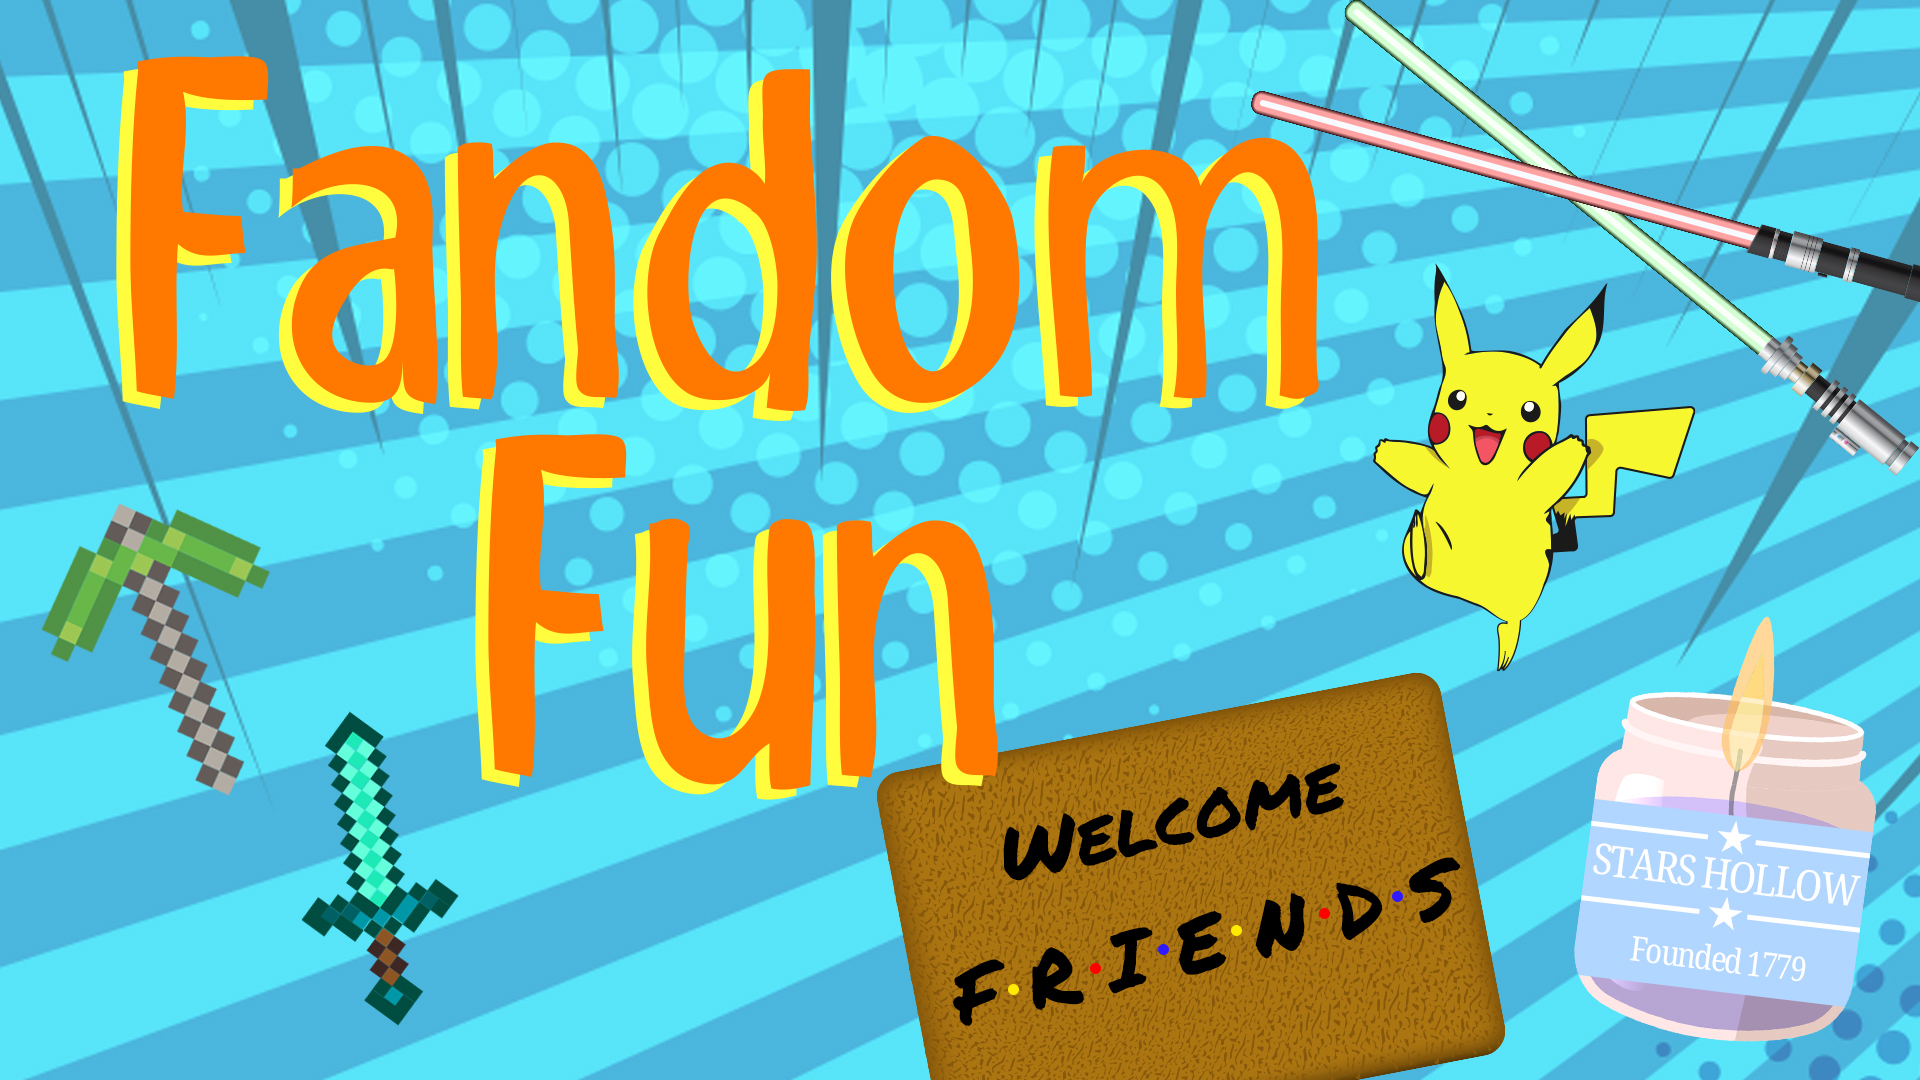 Image reads "Fandom Fun" against a comic book background. A Minecraft pickaxe and diamond sword are to the left of the title. Two light sabers, Pikachu, a F.R.I.E.N.D.s welcome mat, and a Gilmore Girls candle are to the right of the title.